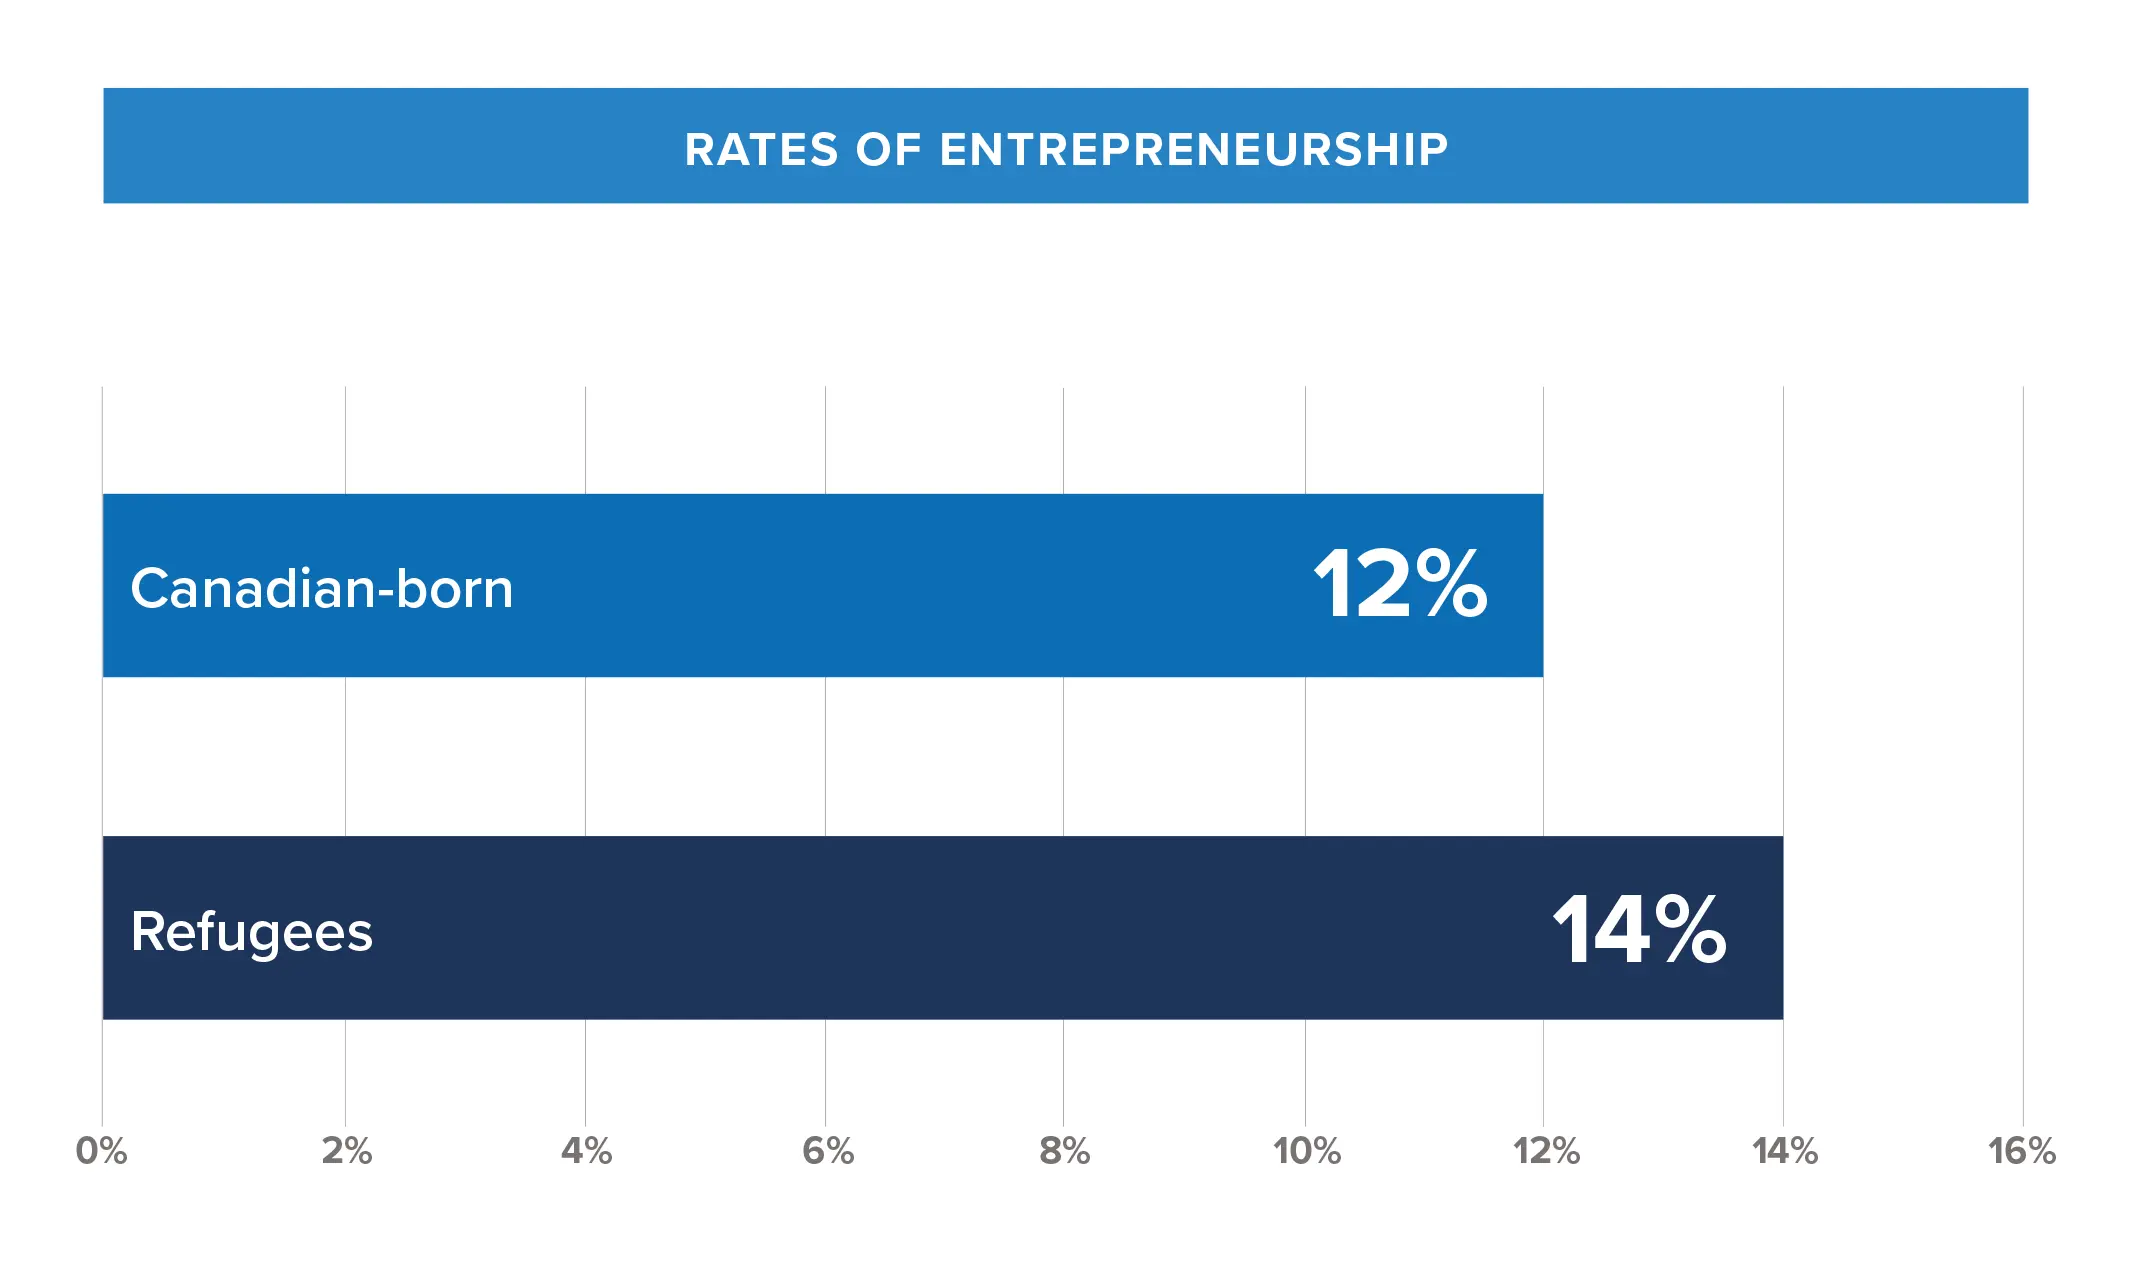 Graph showing rates of entrepreneurship for refugees and Canadian-born citizens.